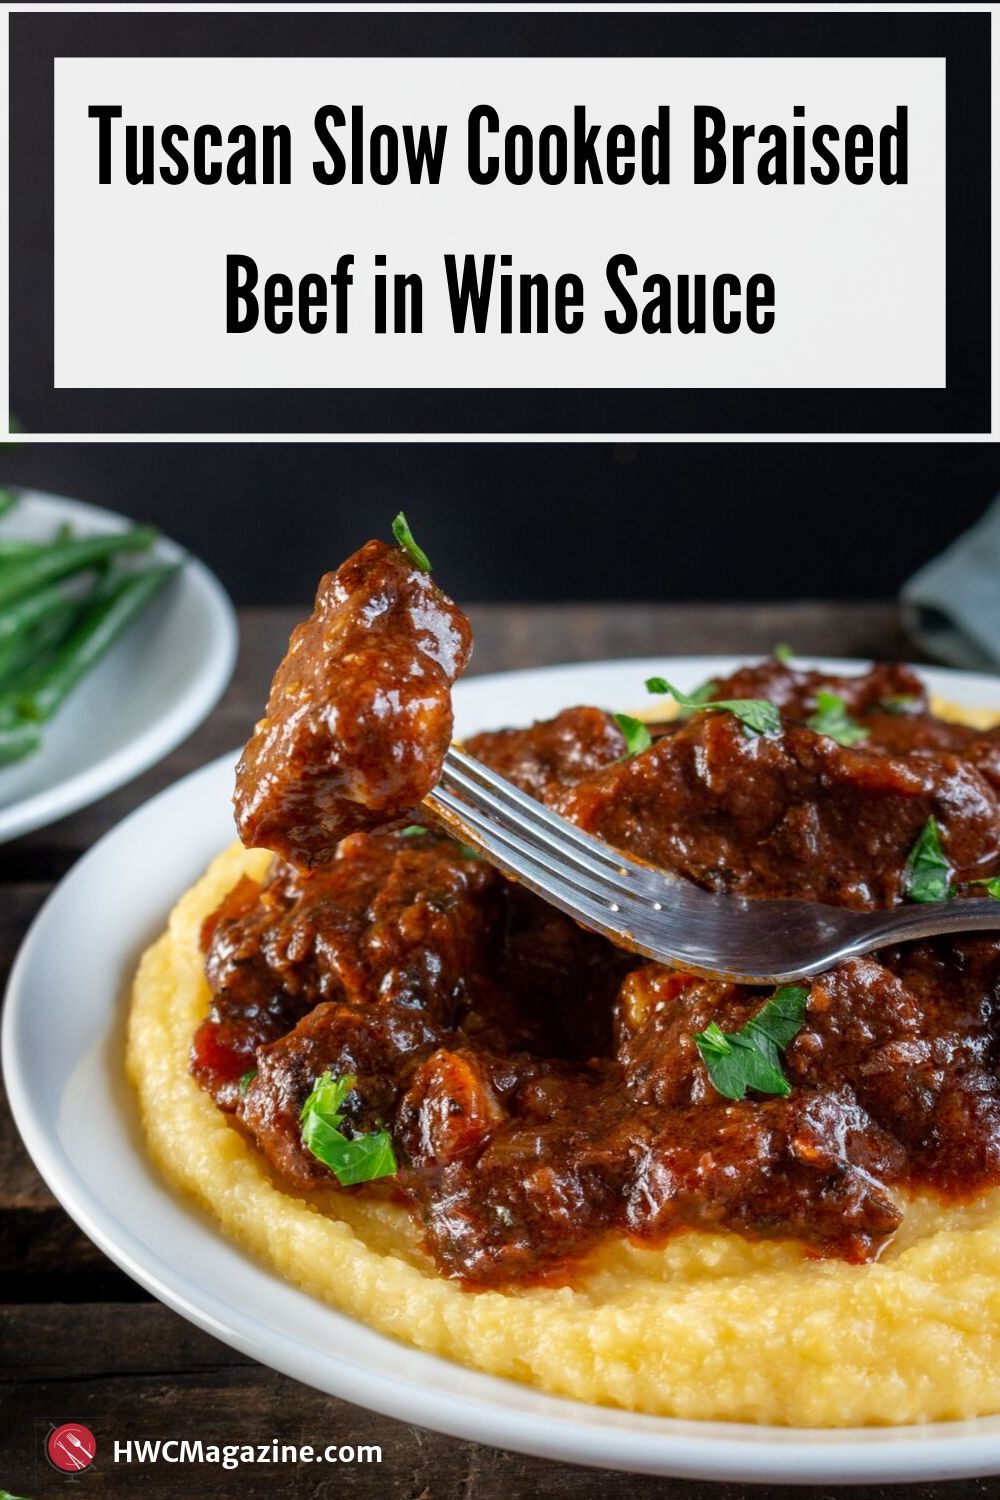 Tuscan Slow Cooked Braised Beef in Wine Sauce / https://www.hwcmagazine.com